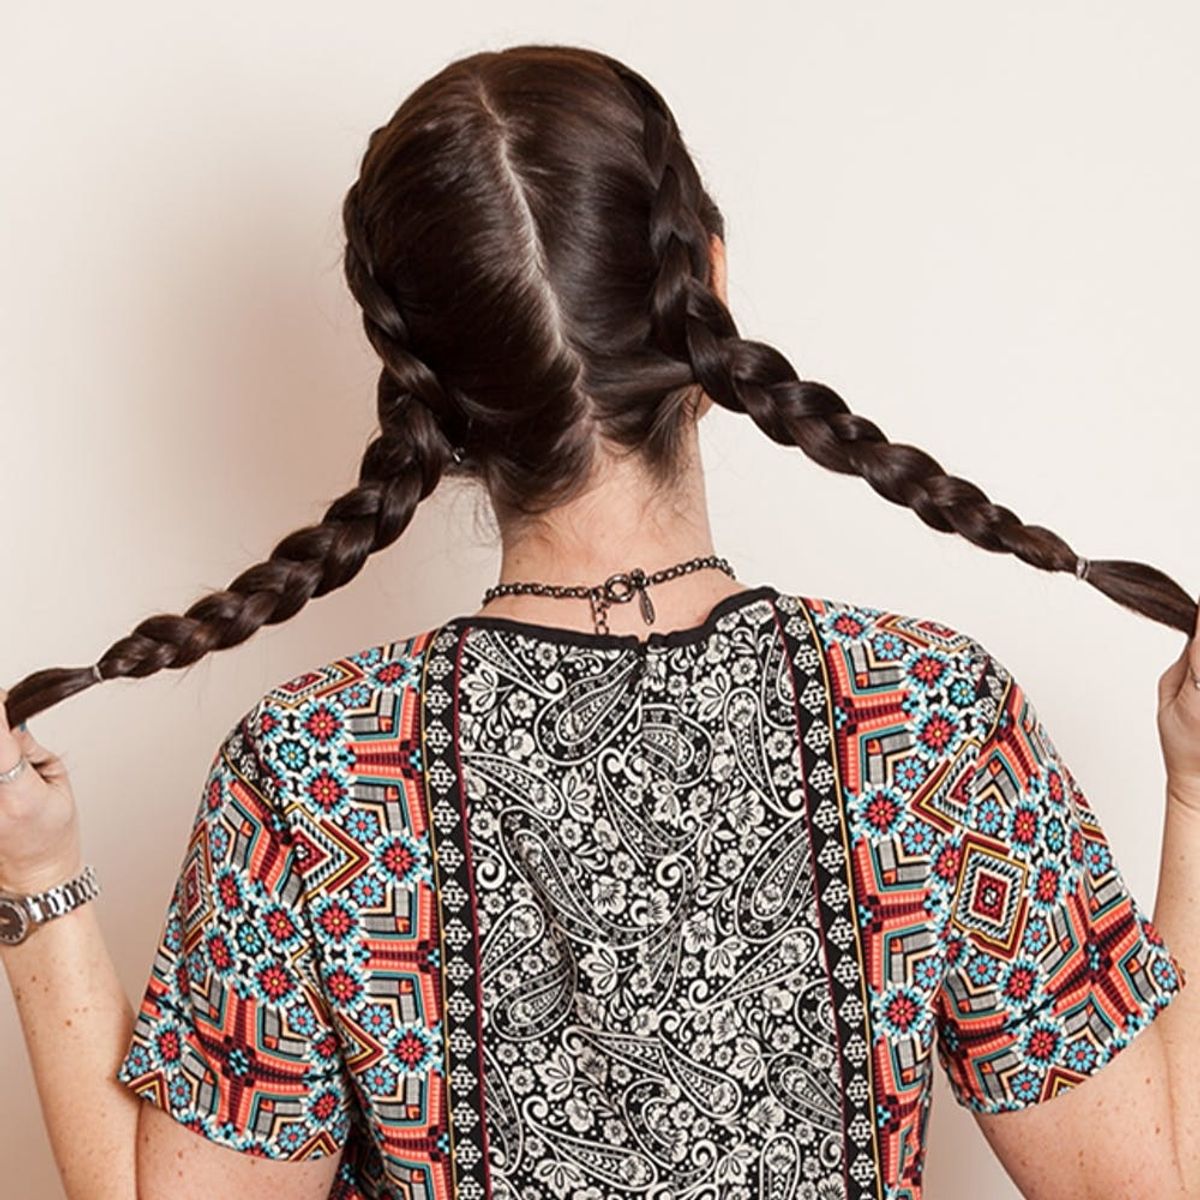 Hack the Trendy Boxer Braid in 5 Minutes Flat